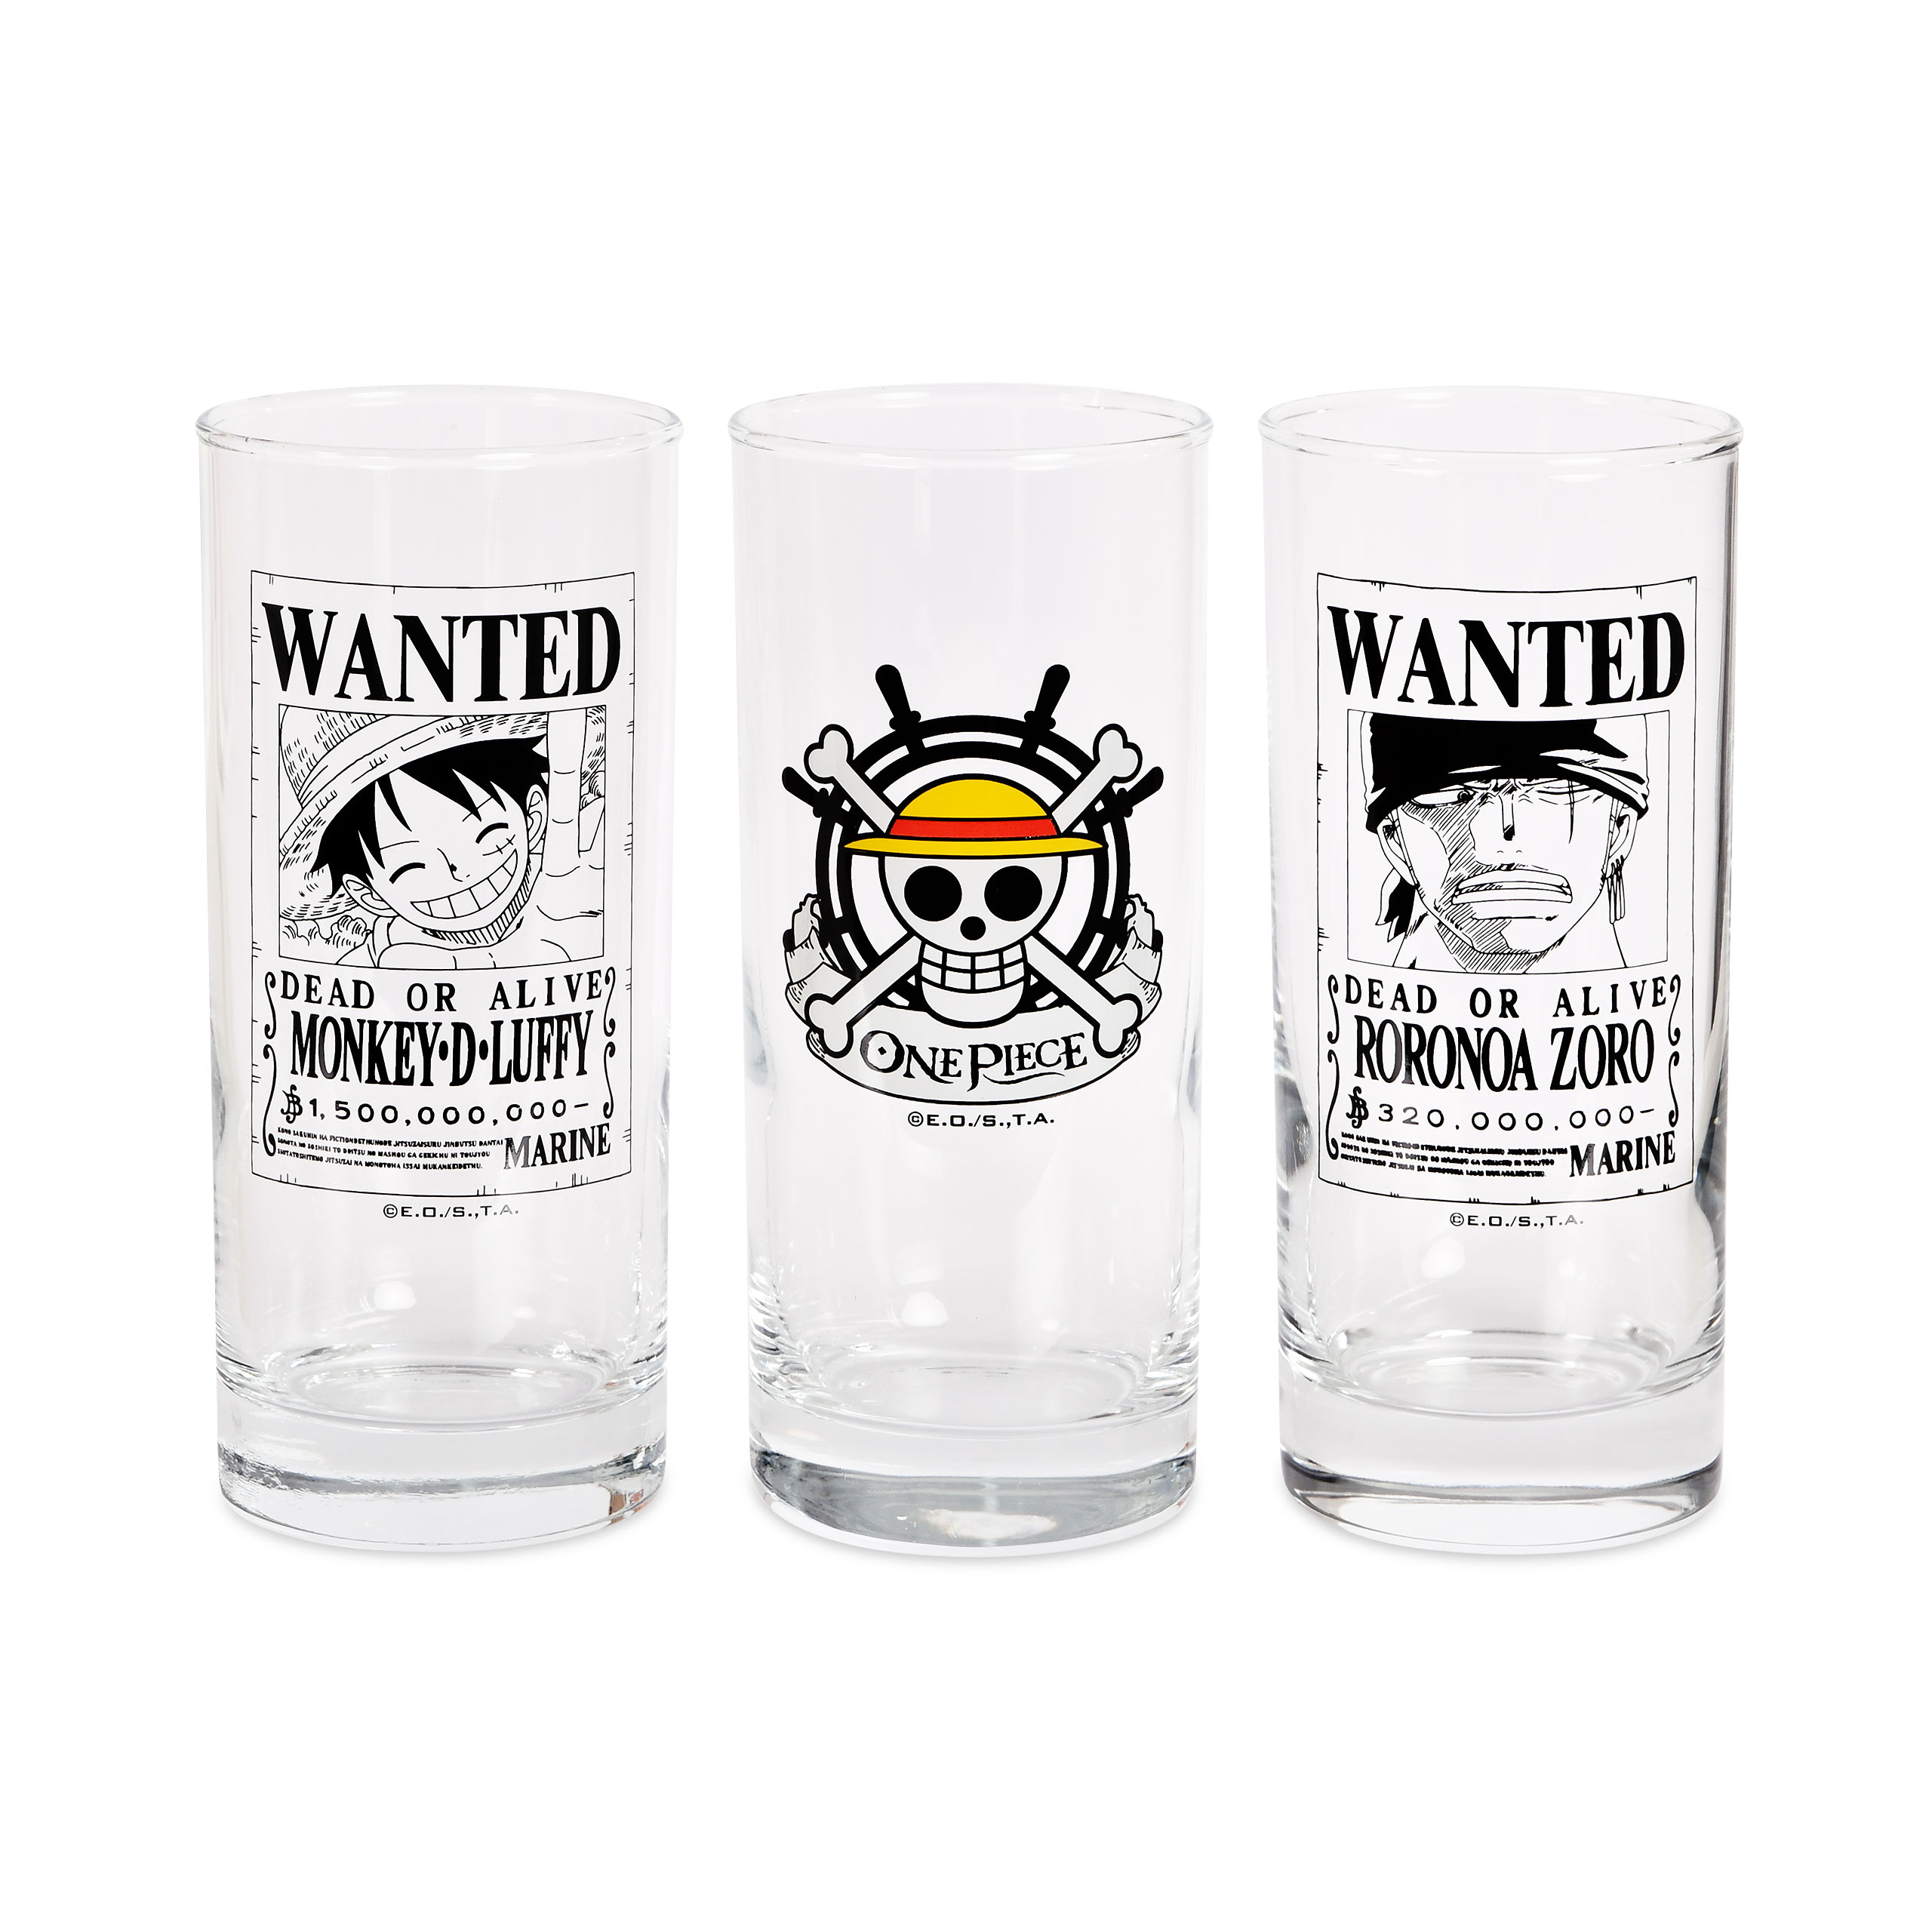 One Piece - Wanted Luffy and Zoro Glass Set